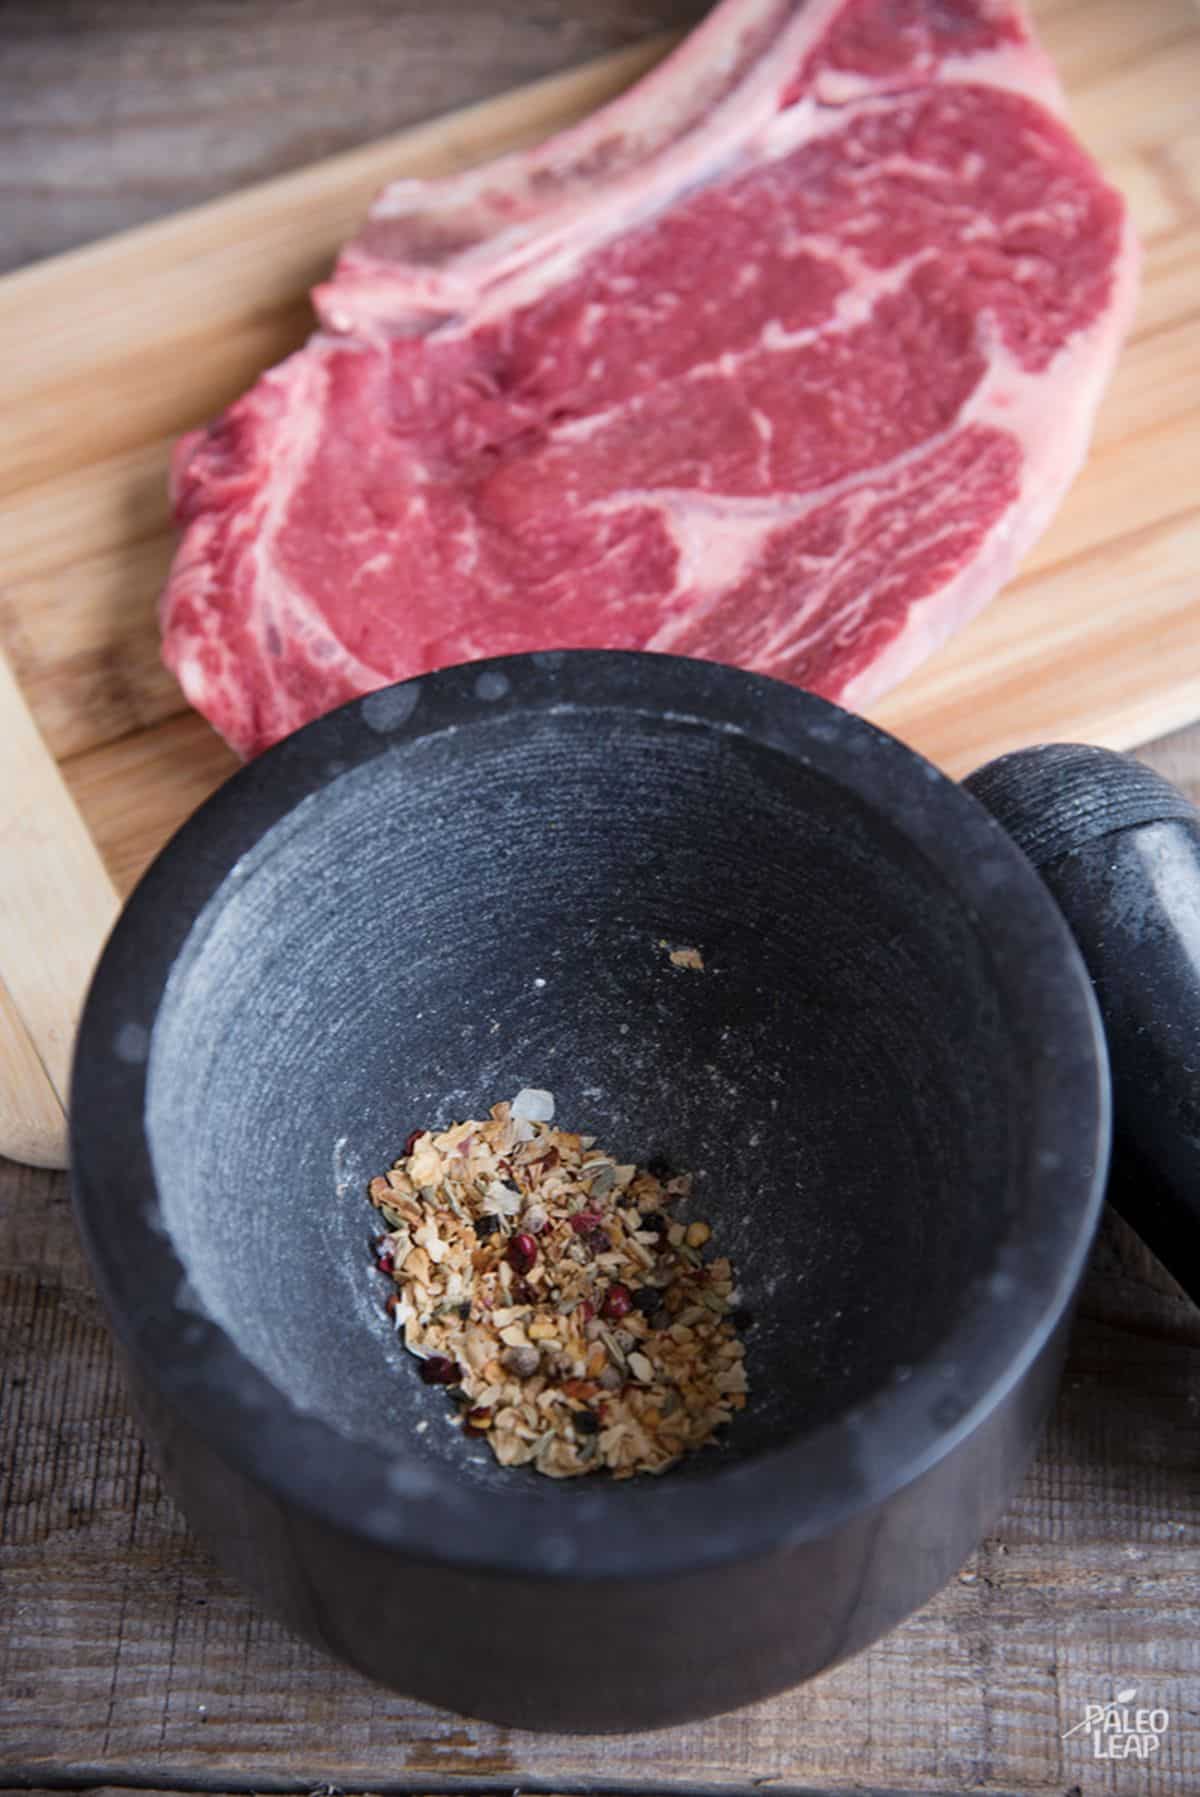 Grilled Steaks With Herb Butter Recipe Preparation